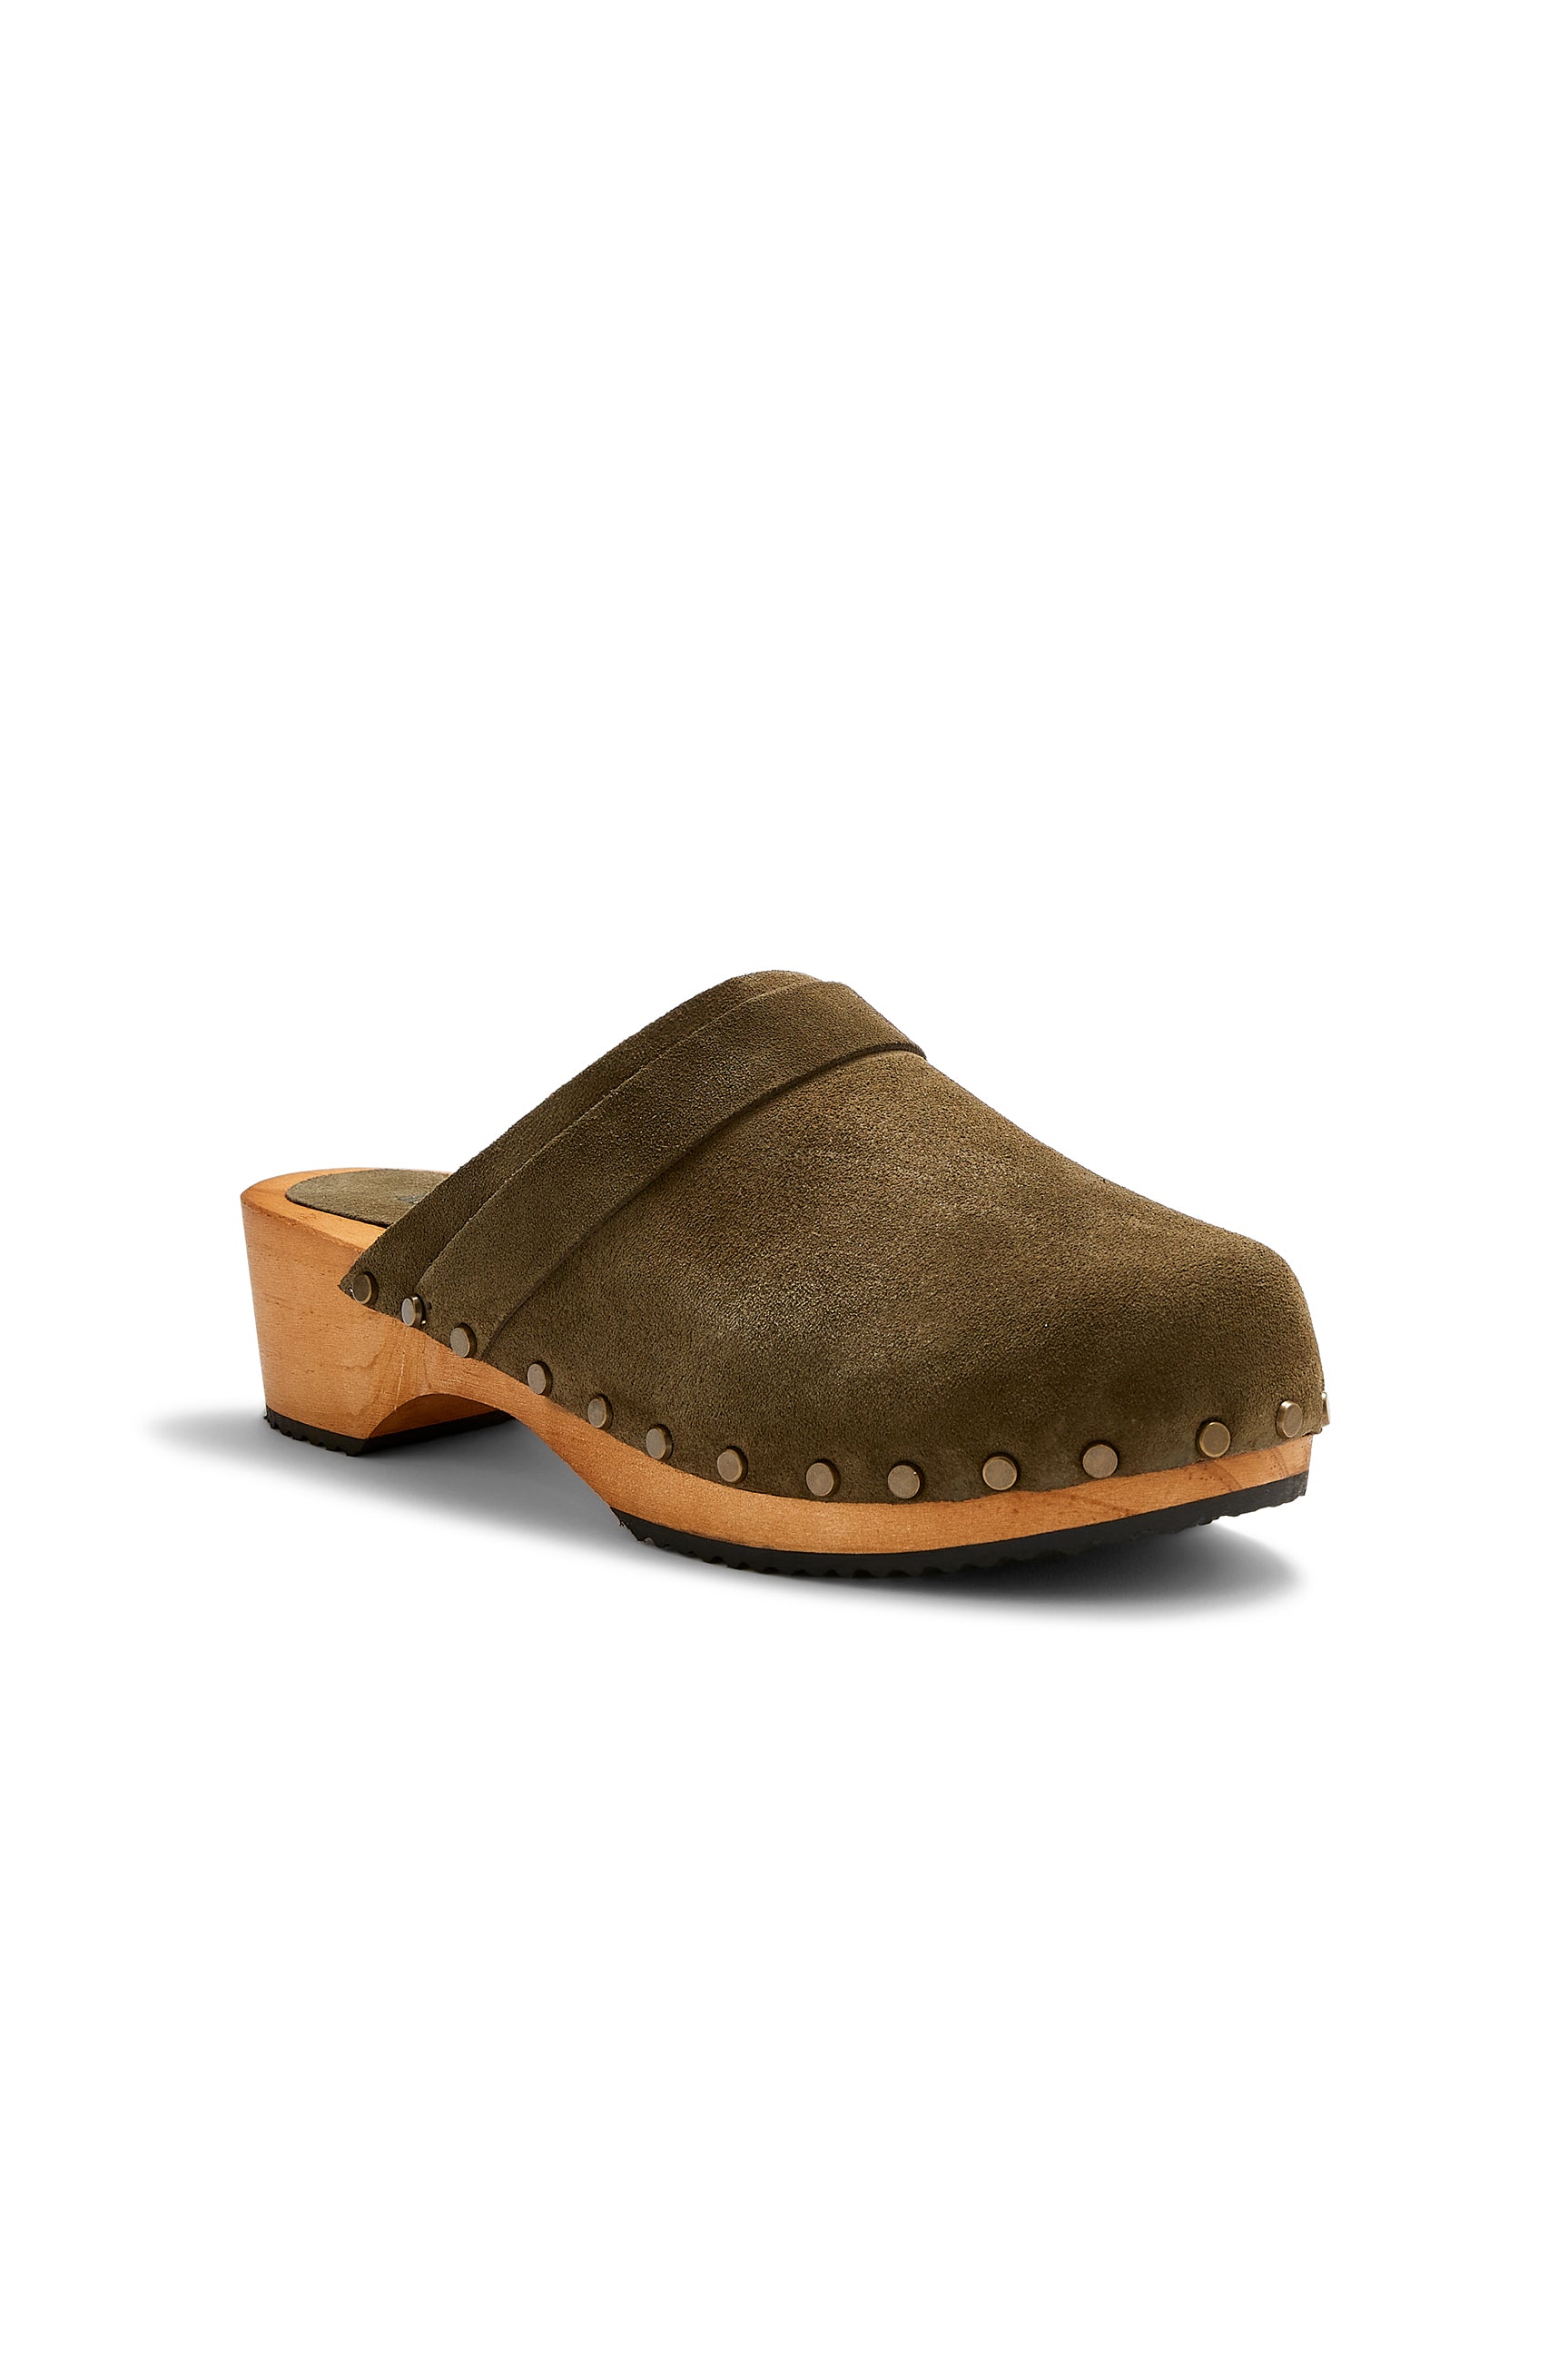 low heel classic clogs in olive suede - Clogs lisa b.